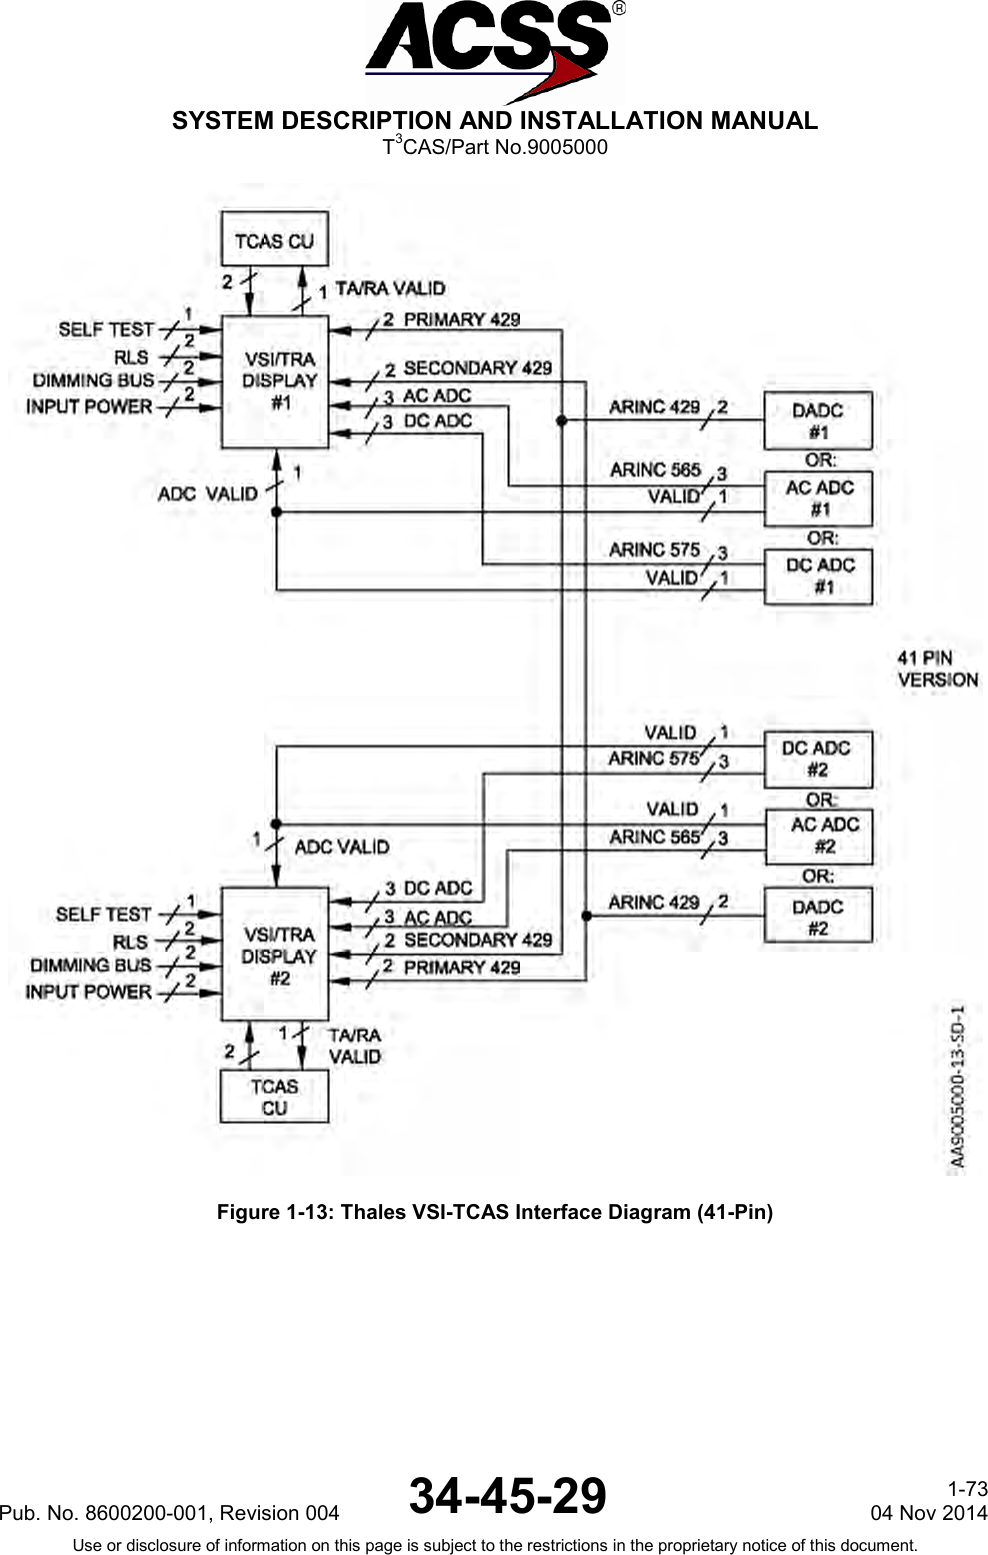  SYSTEM DESCRIPTION AND INSTALLATION MANUAL T3CAS/Part No.9005000  Figure 1-13: Thales VSI-TCAS Interface Diagram (41-Pin) Pub. No. 8600200-001, Revision 004 34-45-29 1-73 04 Nov 2014 Use or disclosure of information on this page is subject to the restrictions in the proprietary notice of this document.  